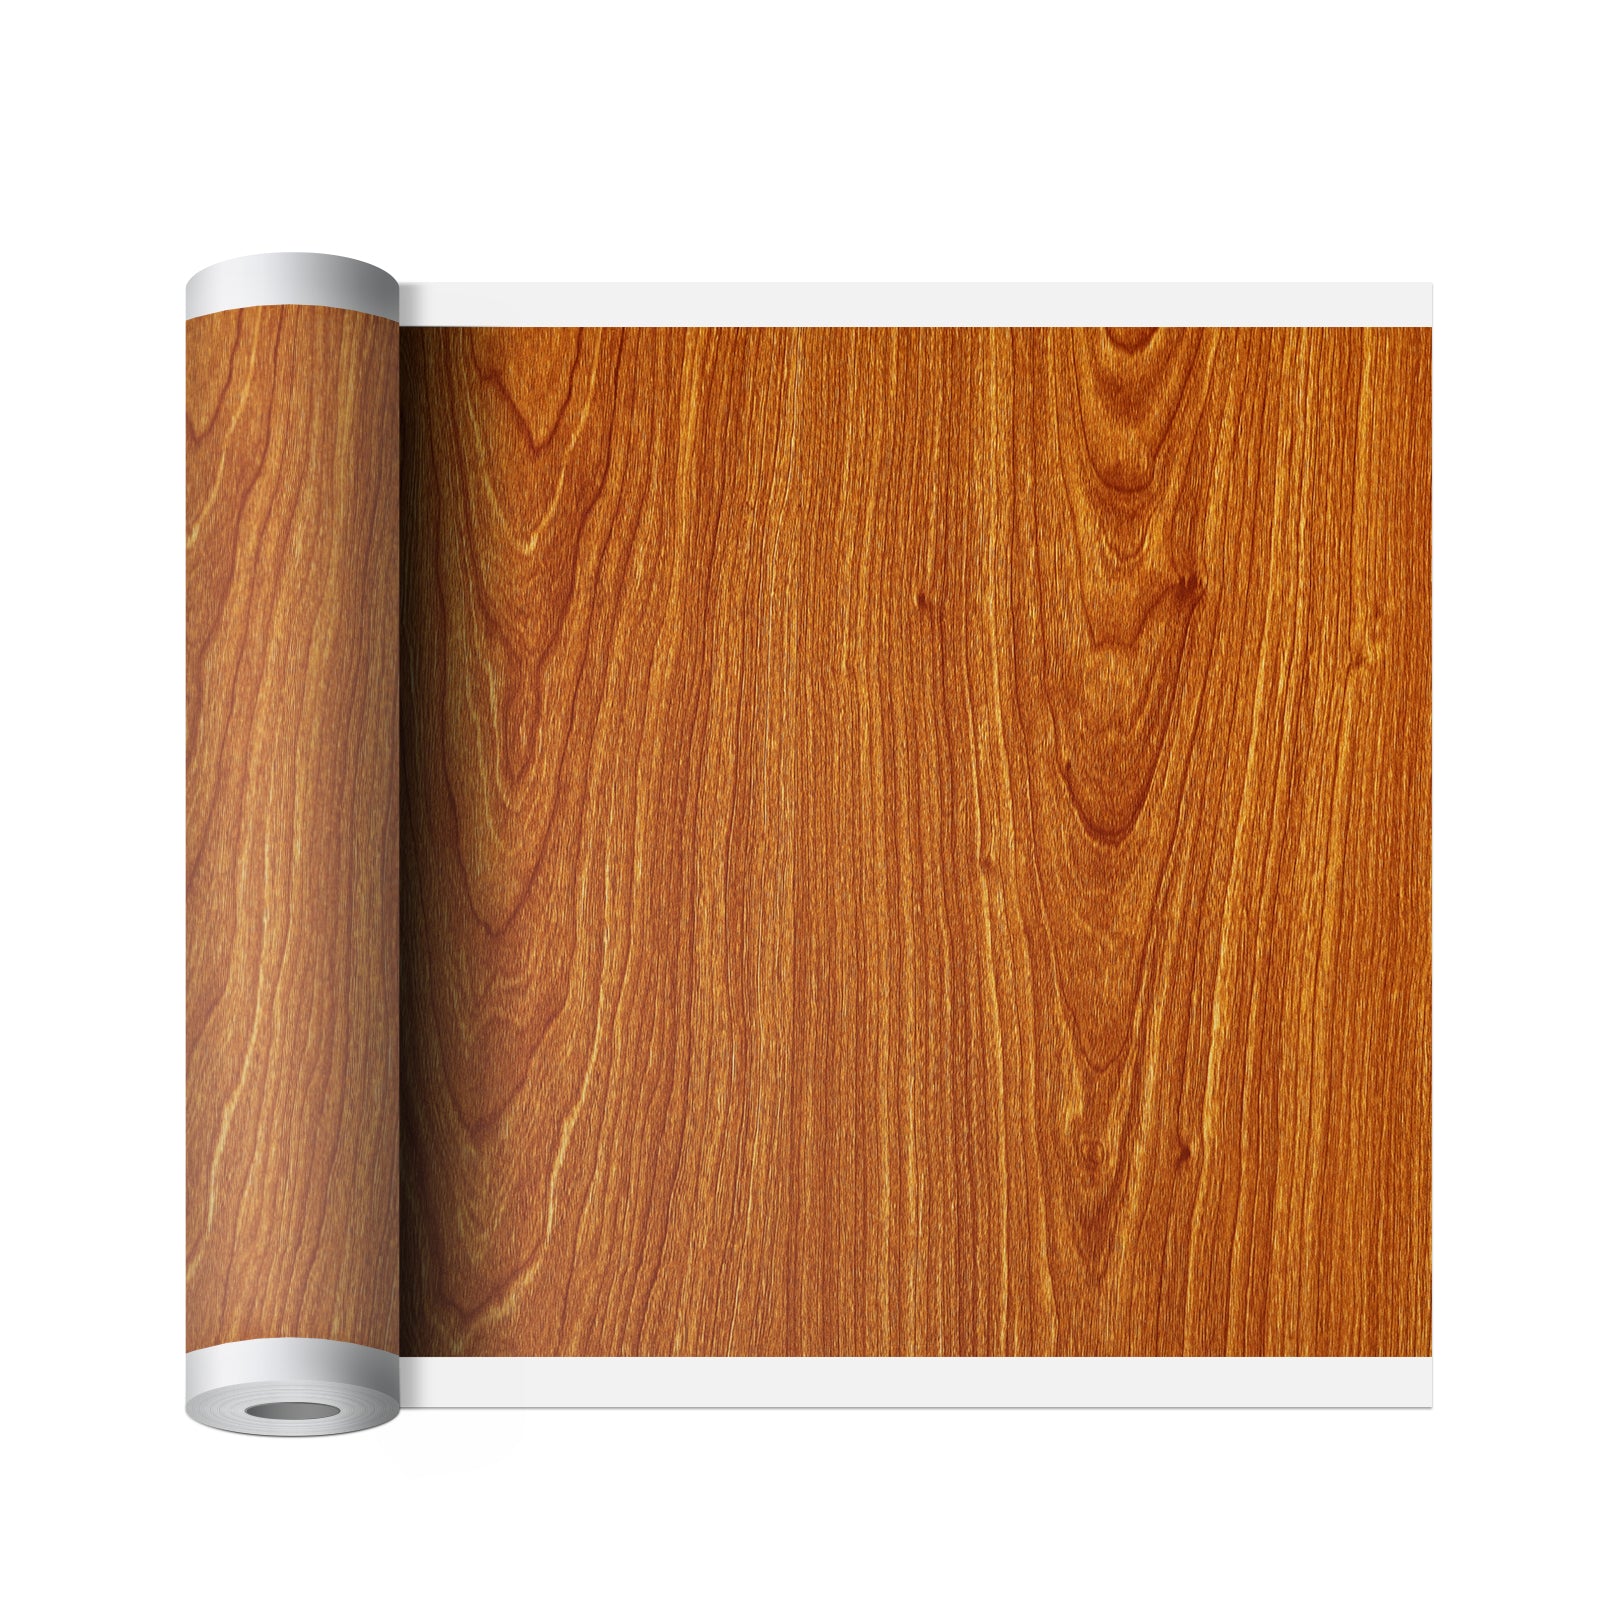 Sublimation Pattern Paper Brown Wood Grain Series (5 Design Options) Roll Size 15 in x 40 ft 15 in x 40 ft / Green Wood Grain / Hydro Transfer Paper